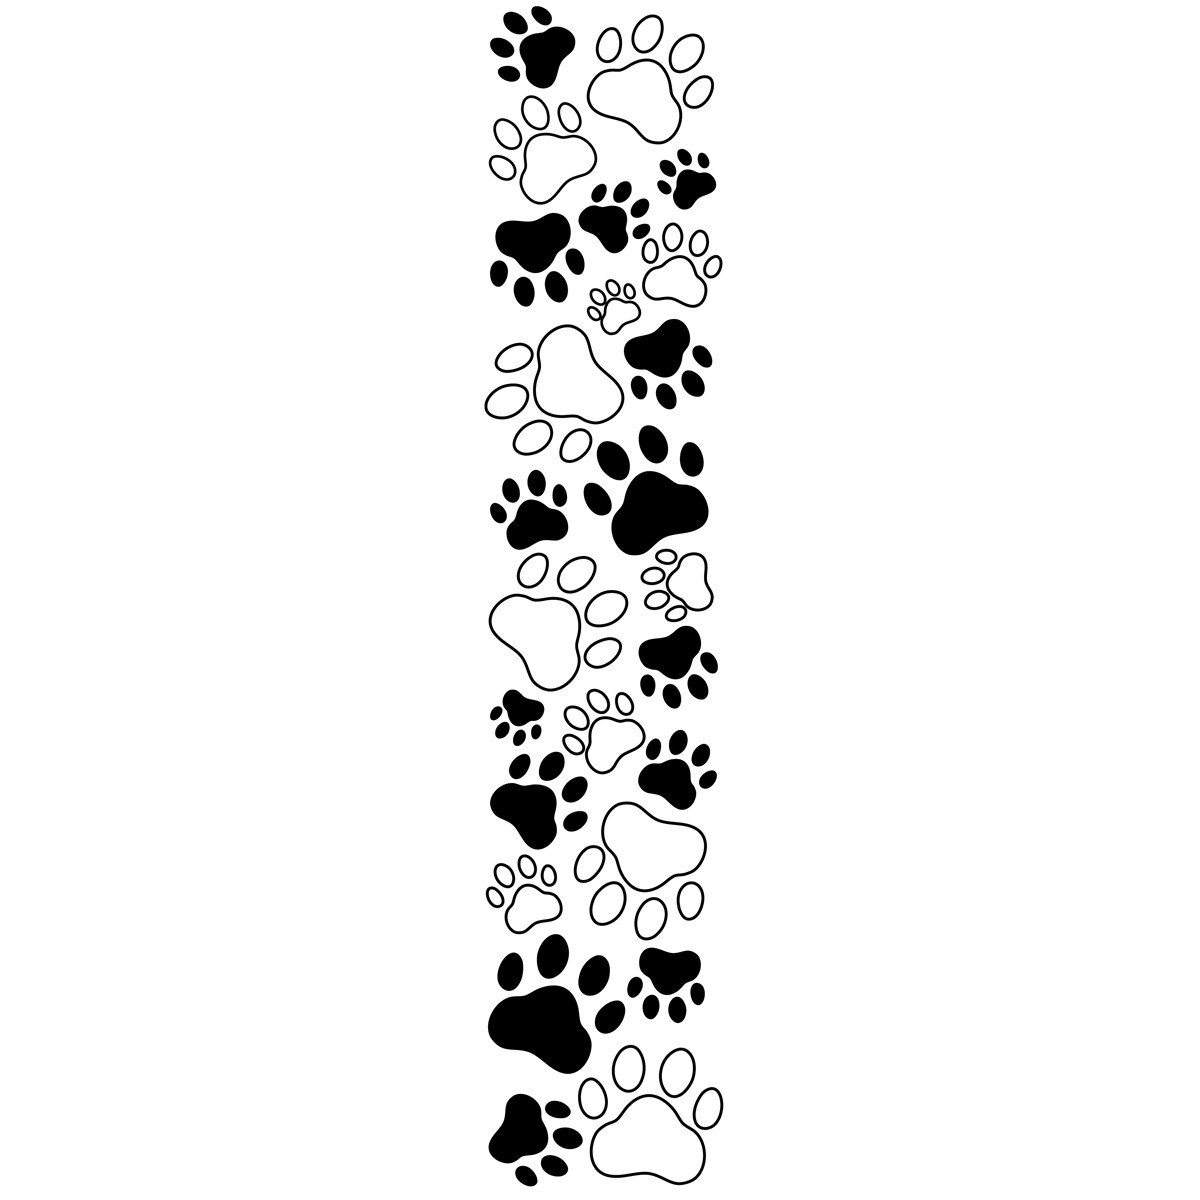 Dog paw prints dog paw print clip art free clipart images image